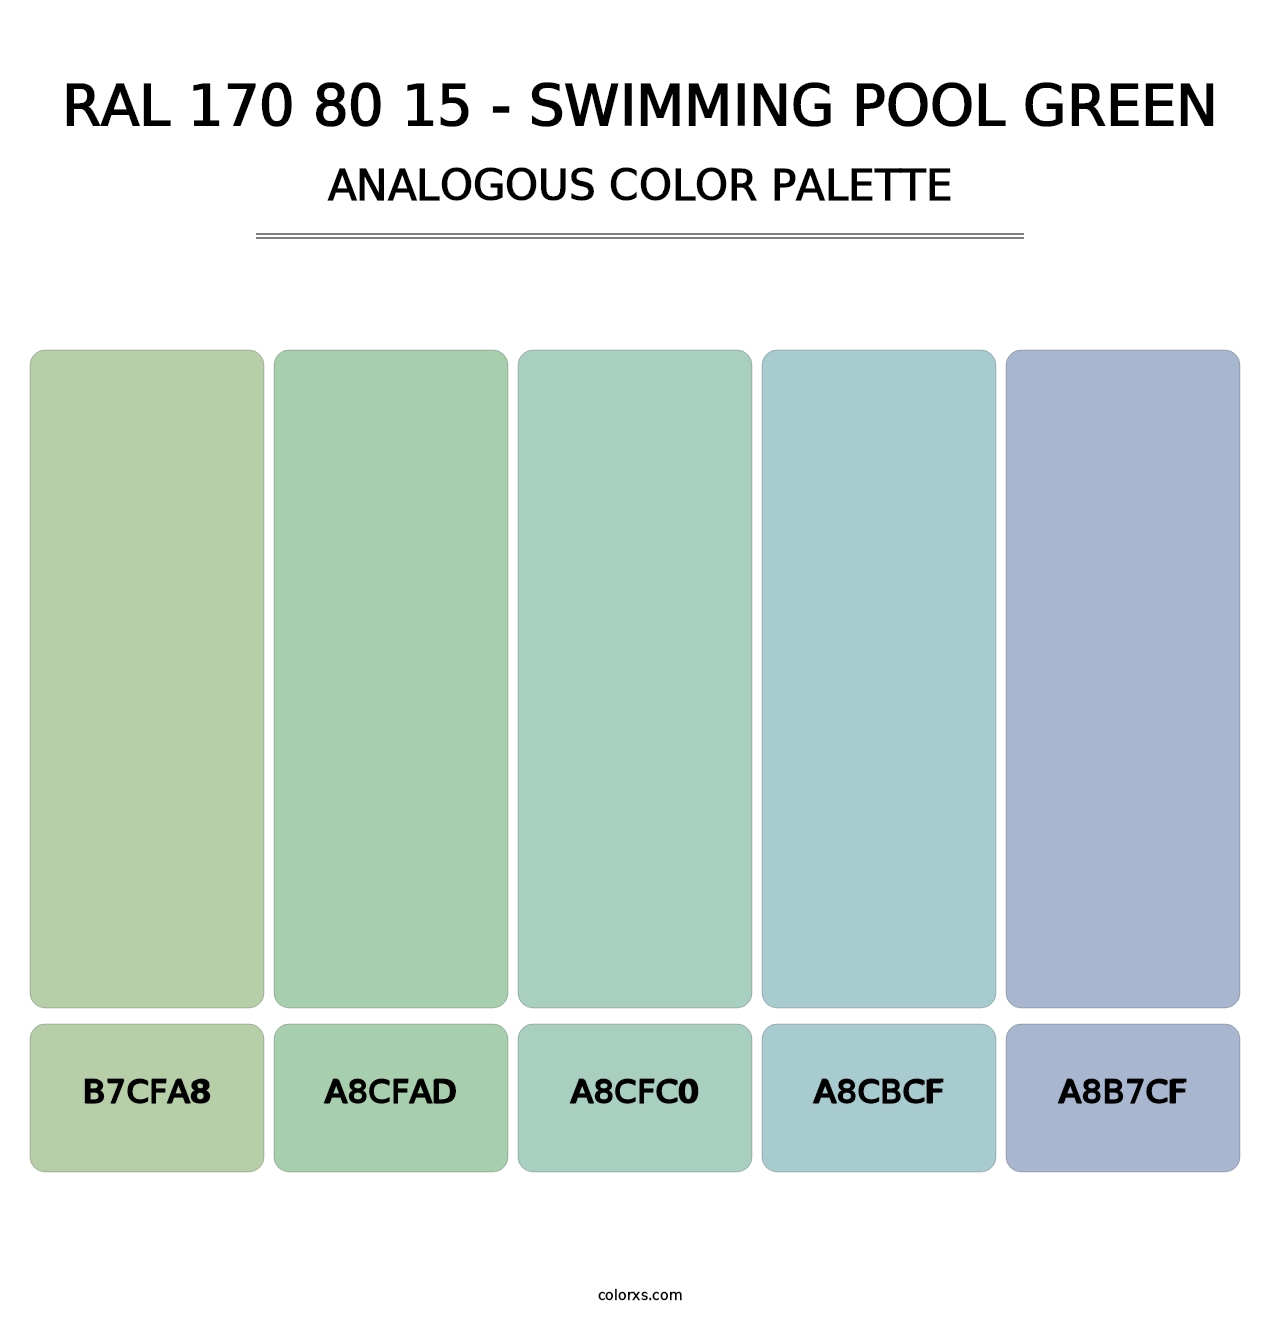 RAL 170 80 15 - Swimming Pool Green - Analogous Color Palette